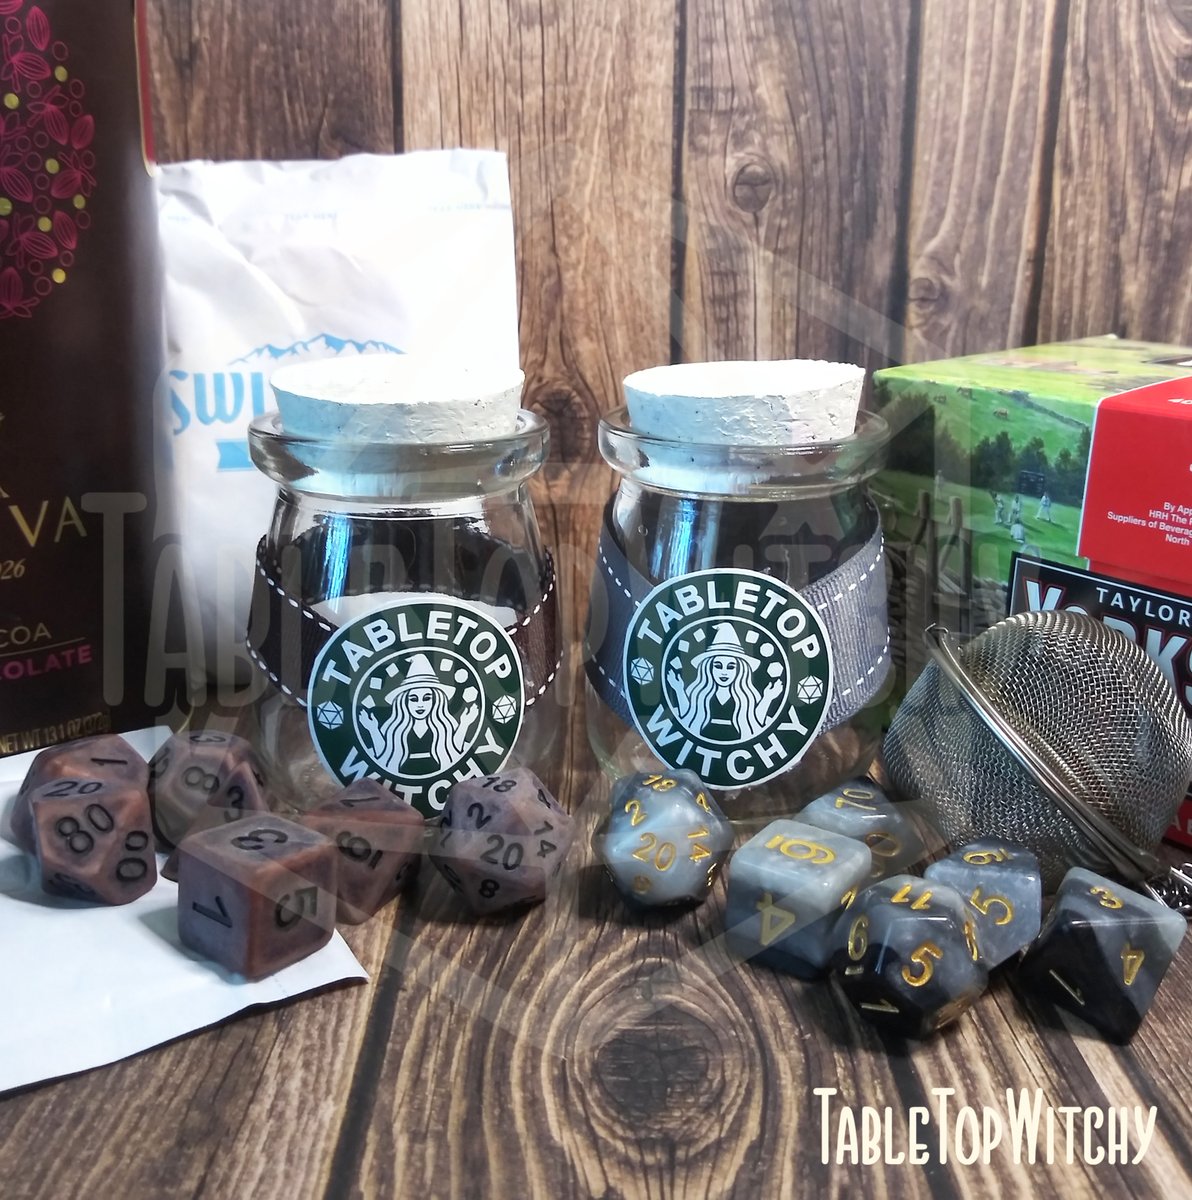 Whats worse then a Monday morning? A Tuesday morning and you're still tired from playing that new game late last night @____@ 5 flavors of my Coffee House dice are available as the perfect dice goblin pick me up, link in bio do not ingest!! #tabletopwitchy #dicegoblin #ttrpg